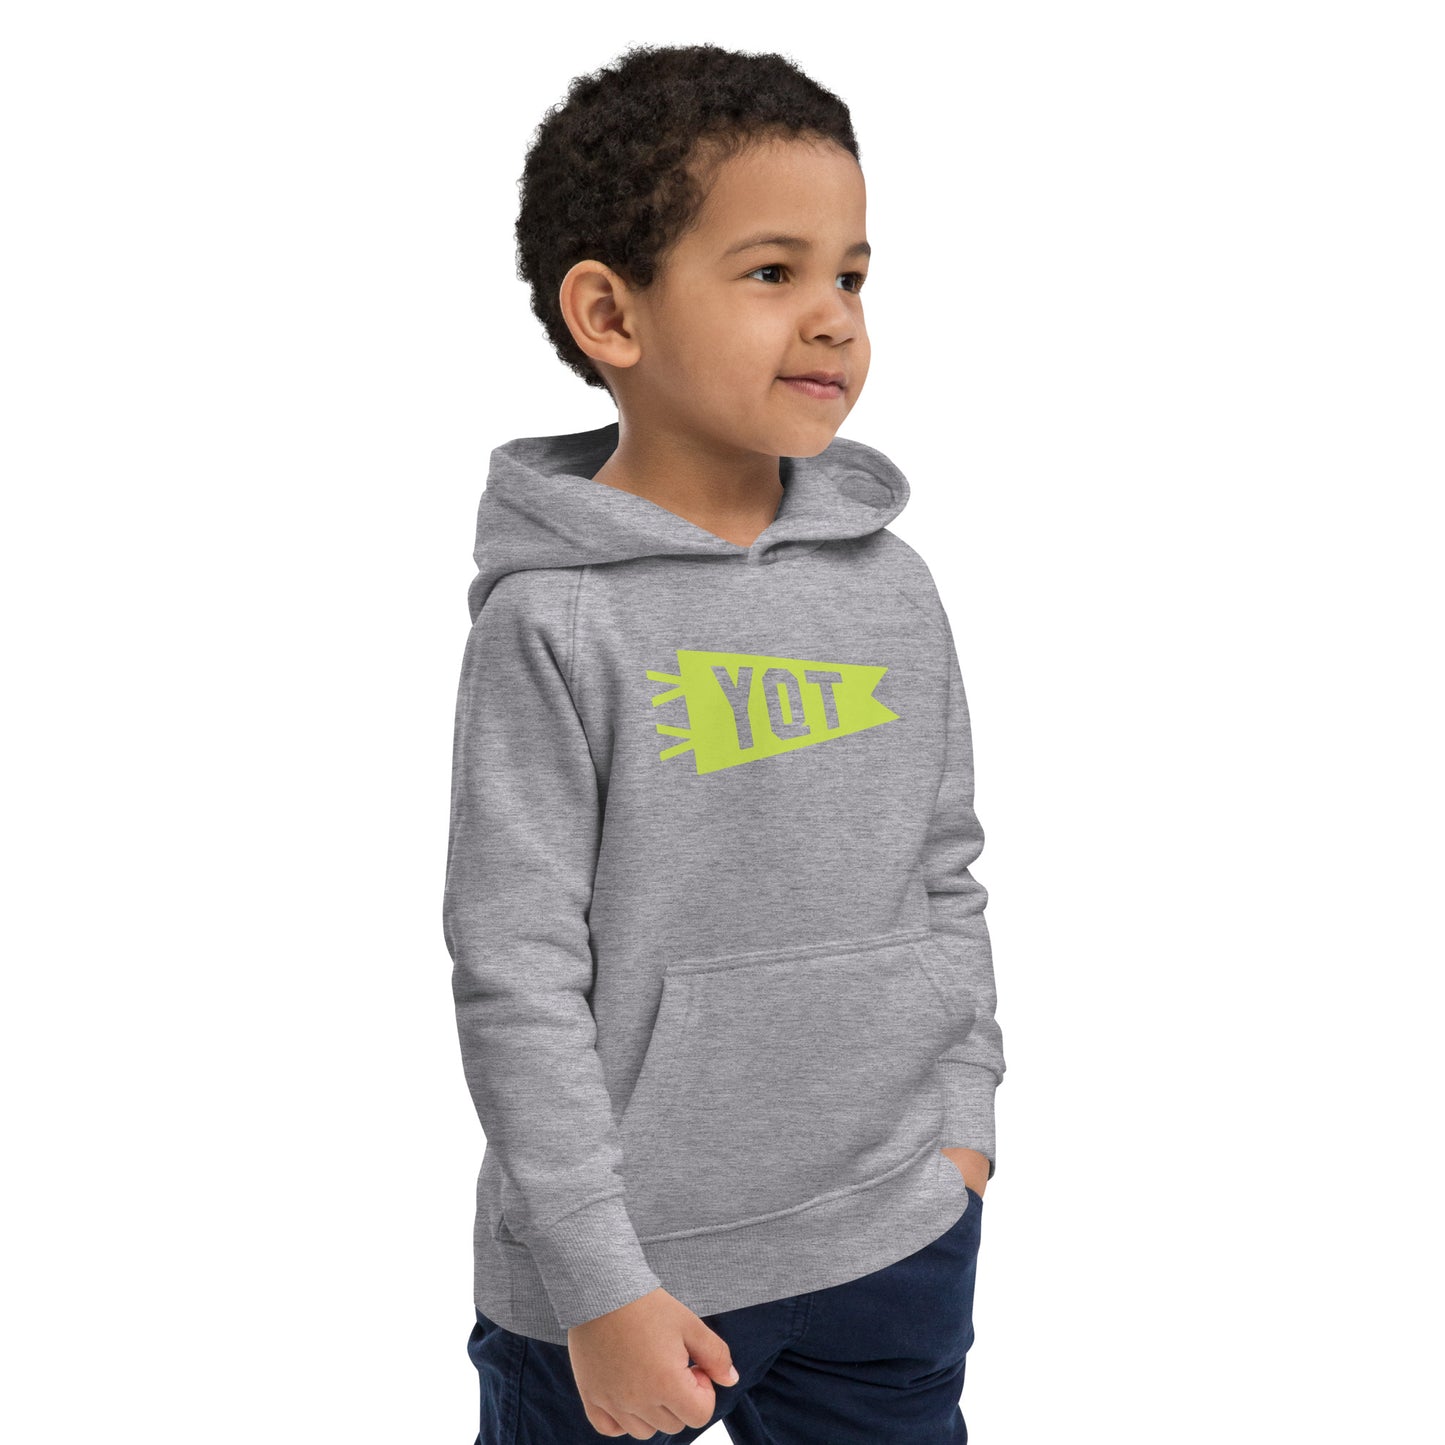 Kid's Sustainable Hoodie - Green Graphic • YQT Thunder Bay • YHM Designs - Image 13